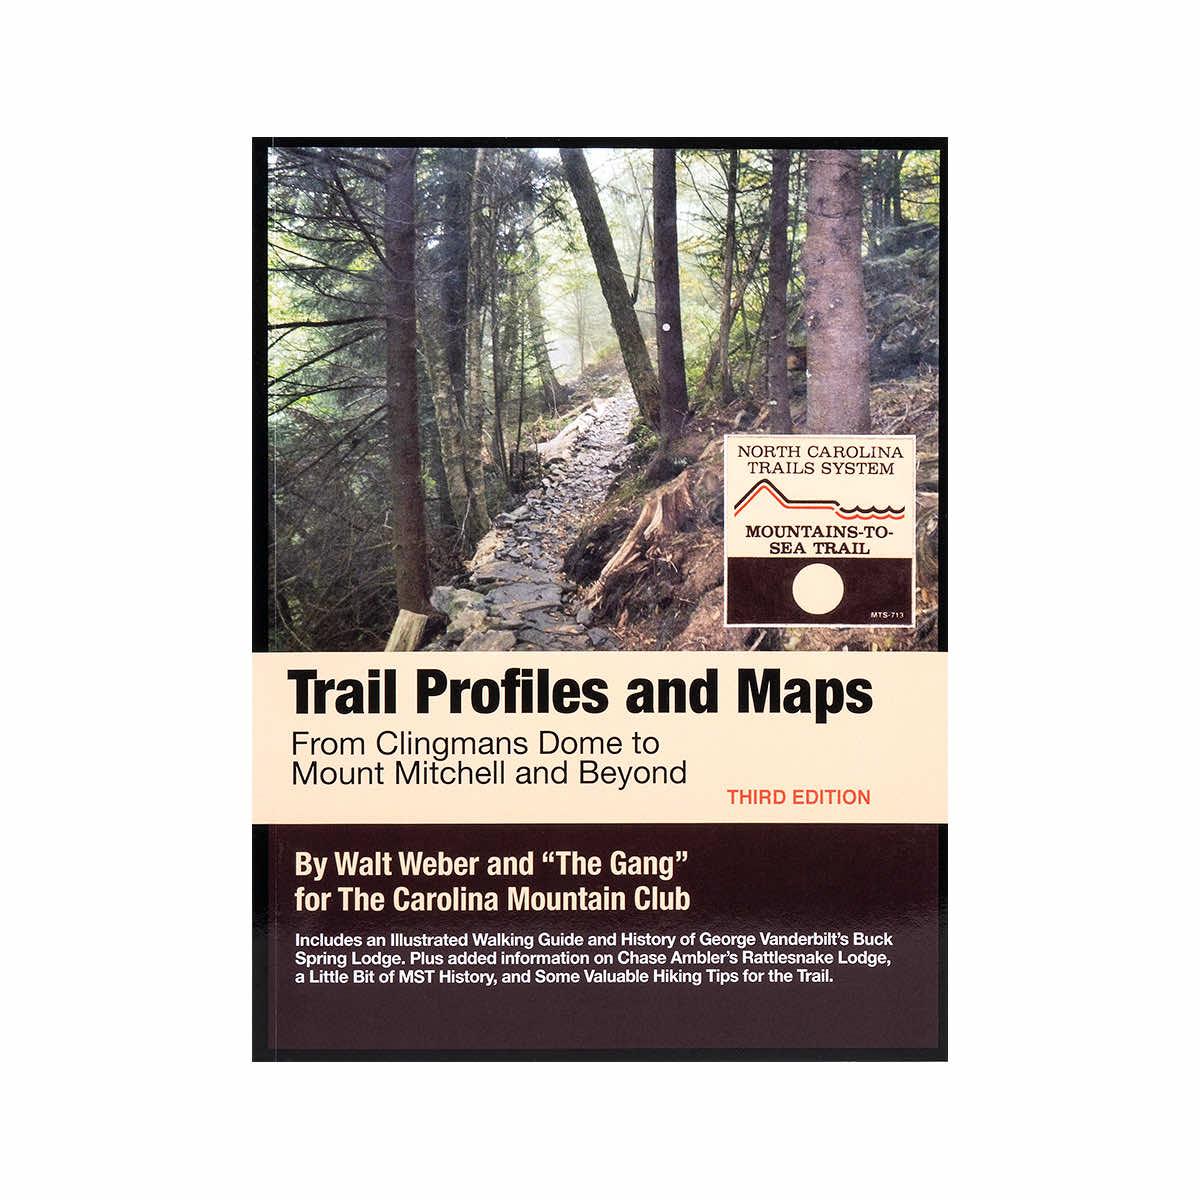  Mountains- To- Sea Trail Profiles And Maps Guide Book - Third Edition